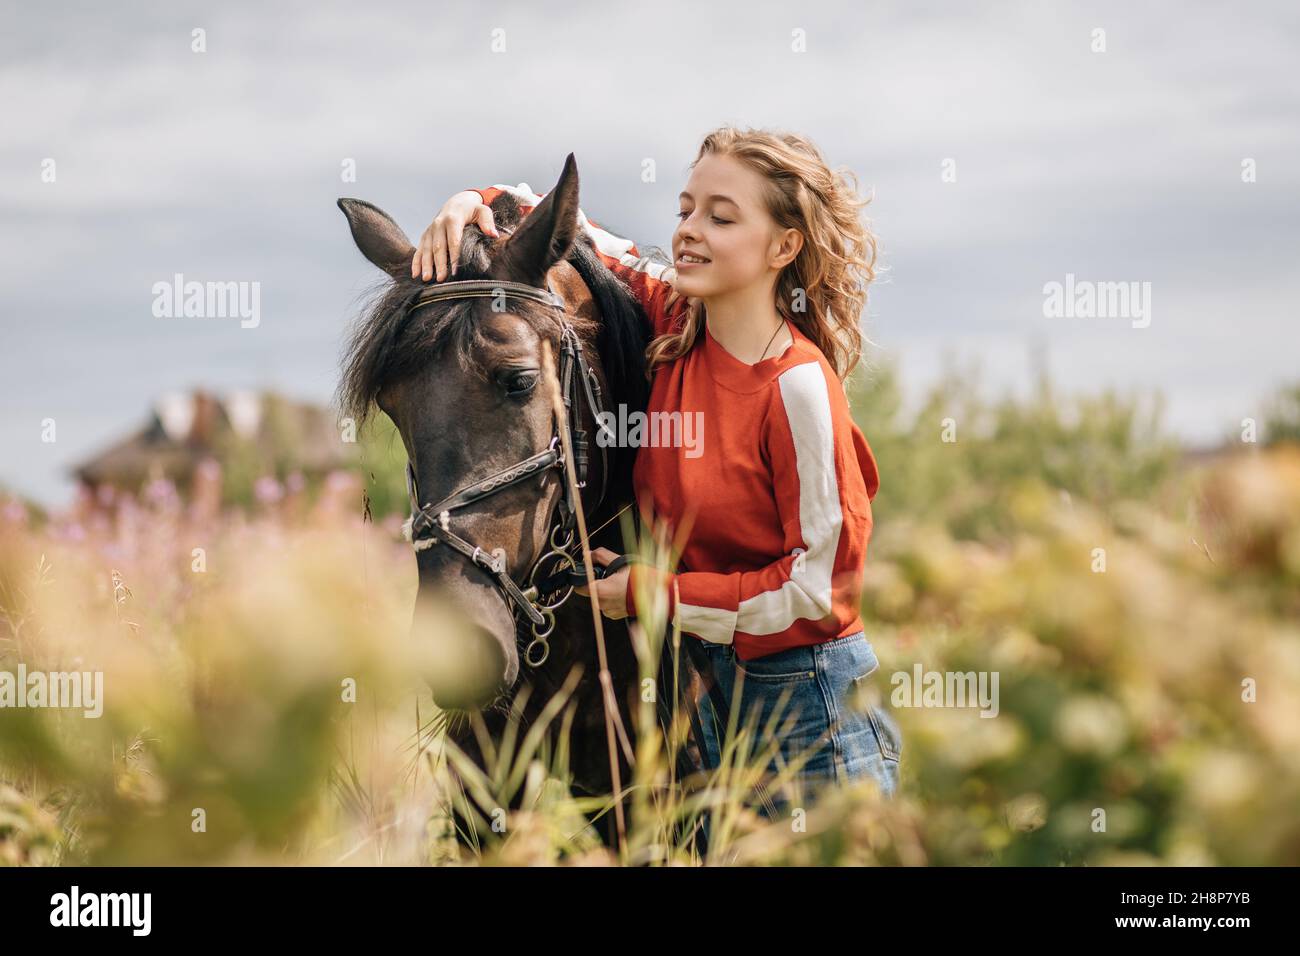 Horse and young woman getting away from it all, lifestyle. Stock Photo